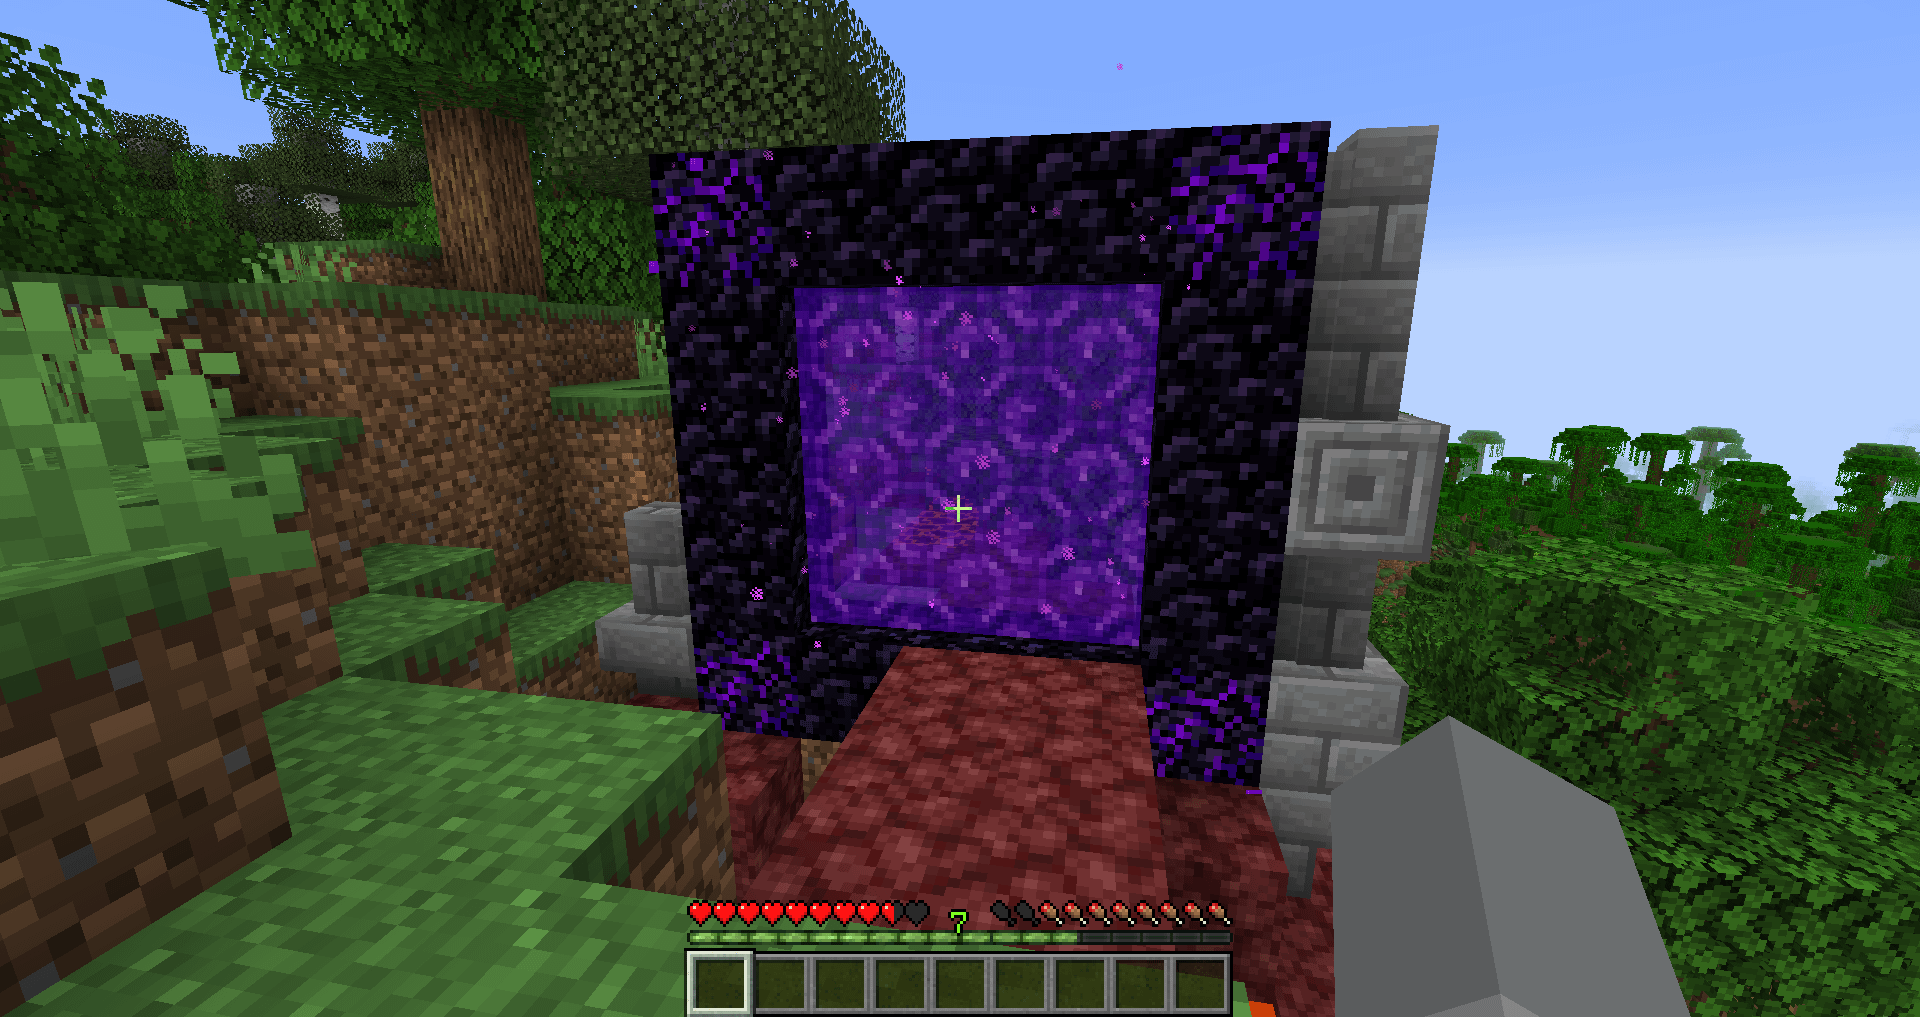 Minecraft Memes - Nether portal accepts cries for help with obsidian.